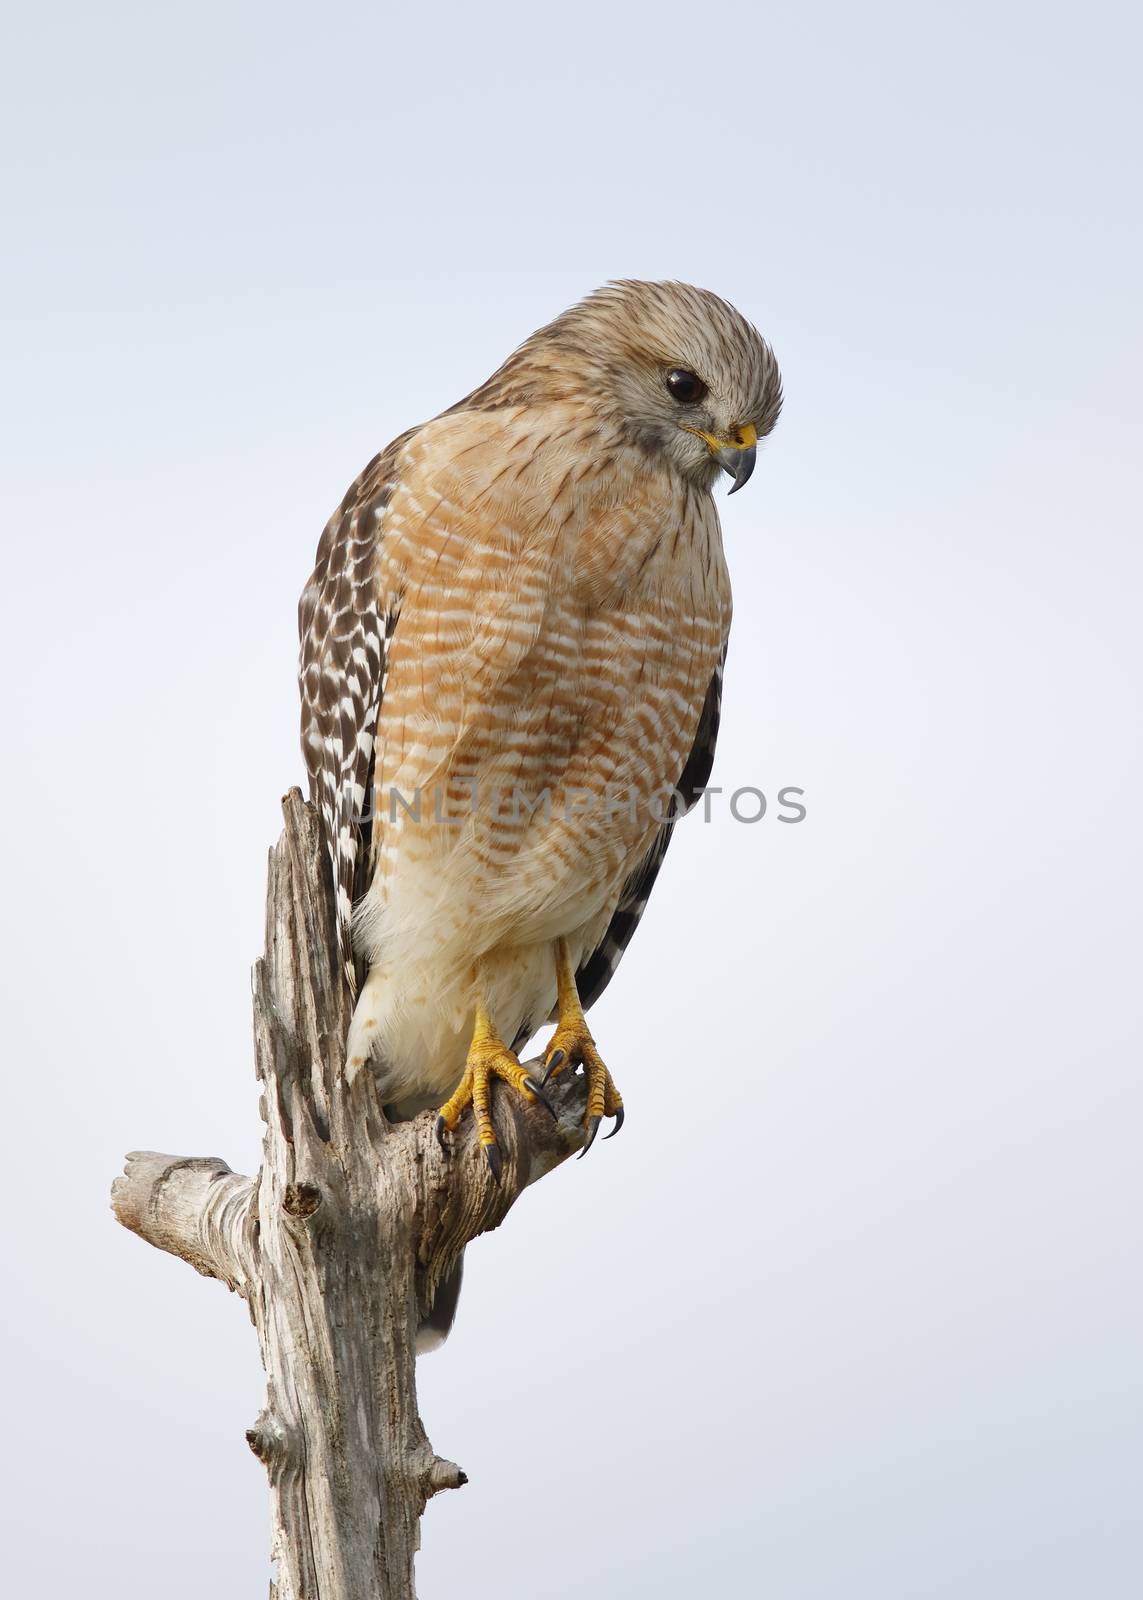 Red-shouldered Hawk (Buteo lineatus) perched in a dead tree - Melbourne, Florida